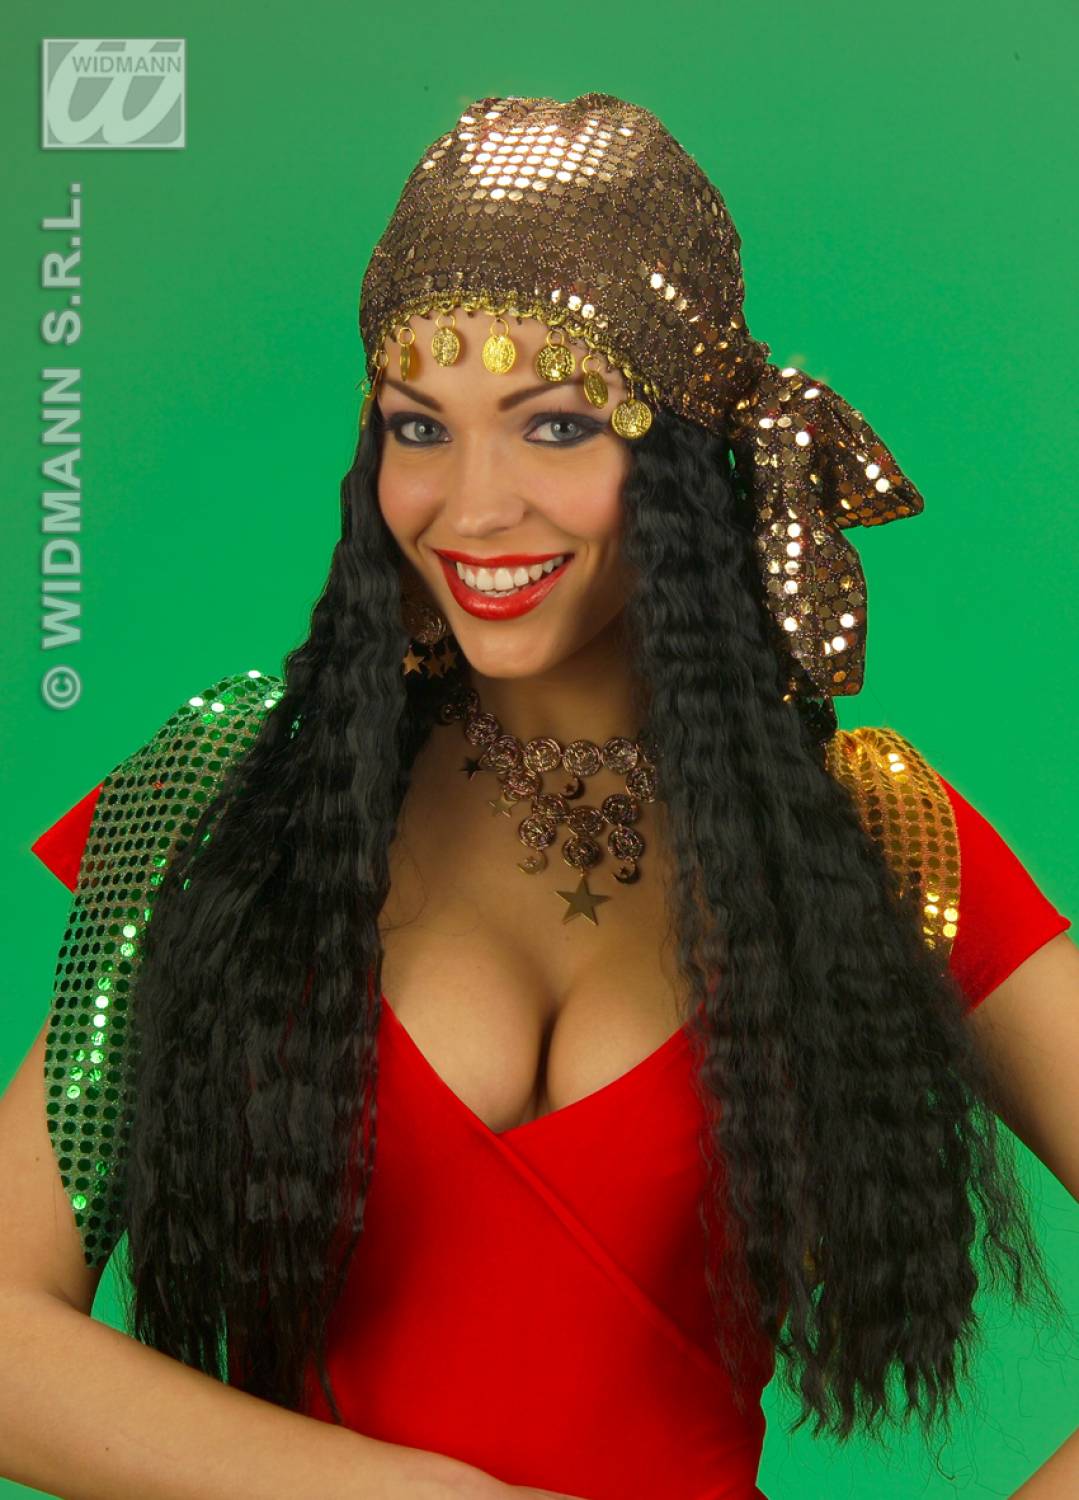 http://static.webshopapp.com/shops/002381/files/000413084/carnival-accessory-wig-gipsy-woman-with-kerchief.jpg